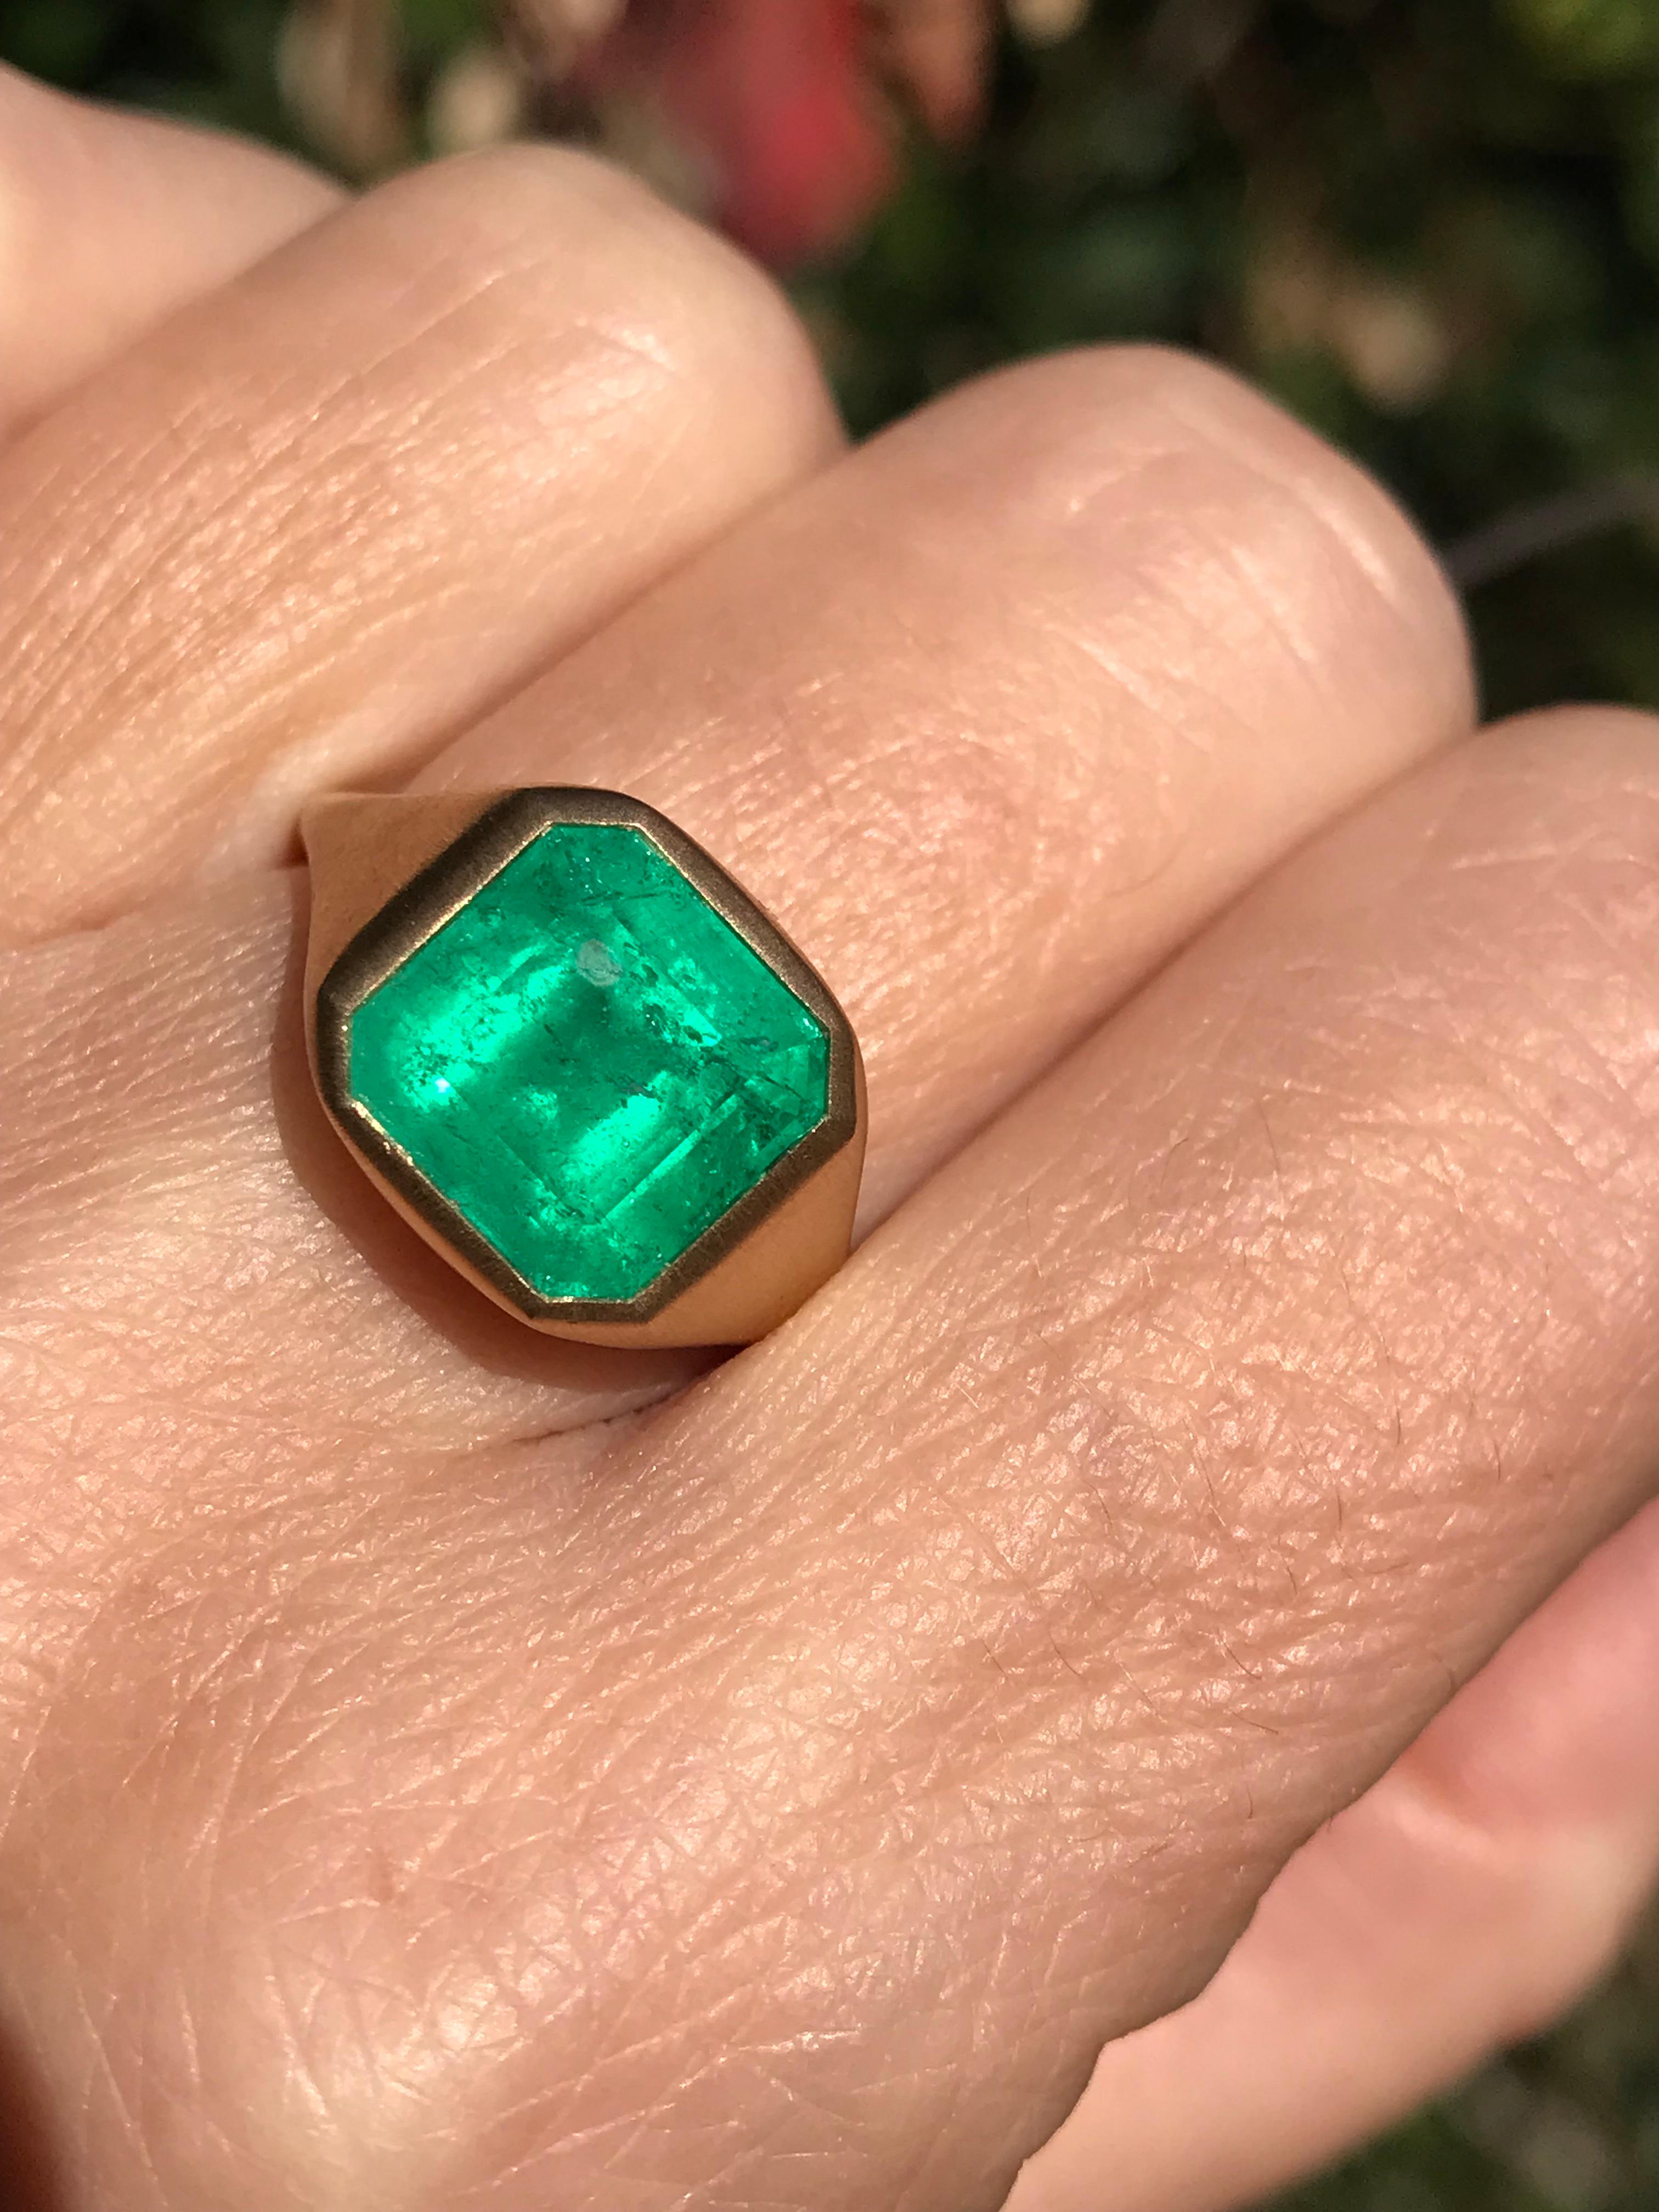 Dalben design One of a Kind 18k yellow gold satin finishing ring with a 4,12 carat bezel-set emerald cut emerald. 
Ring size 7 1/4  USA - EU 55 re-sizable to most finger sizes. 
Bezel stone dimensions :
width 11,3 mm
height 11,2 mm
The ring has been